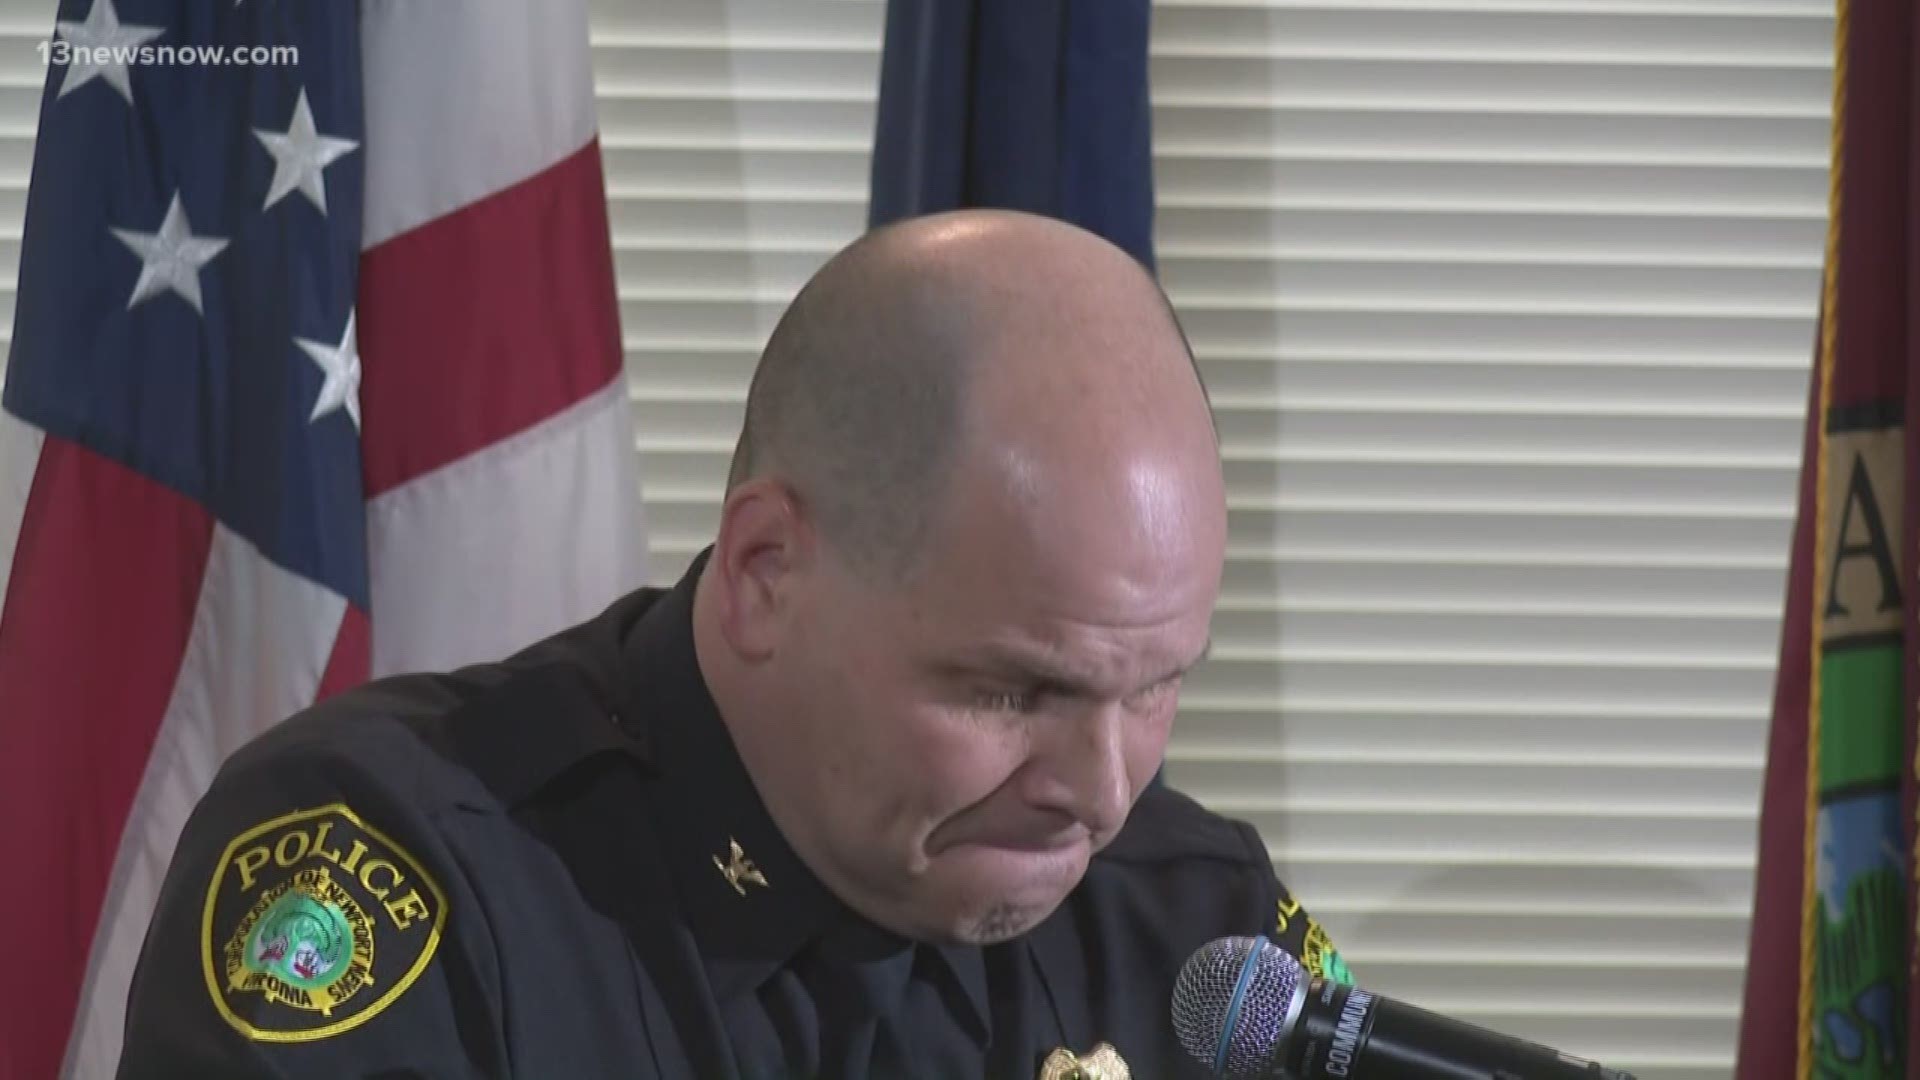 Newport News Police Chief Steve Drew fought back tears during a news conference about the death of Officer Katie Thyne who died in the line of duty.